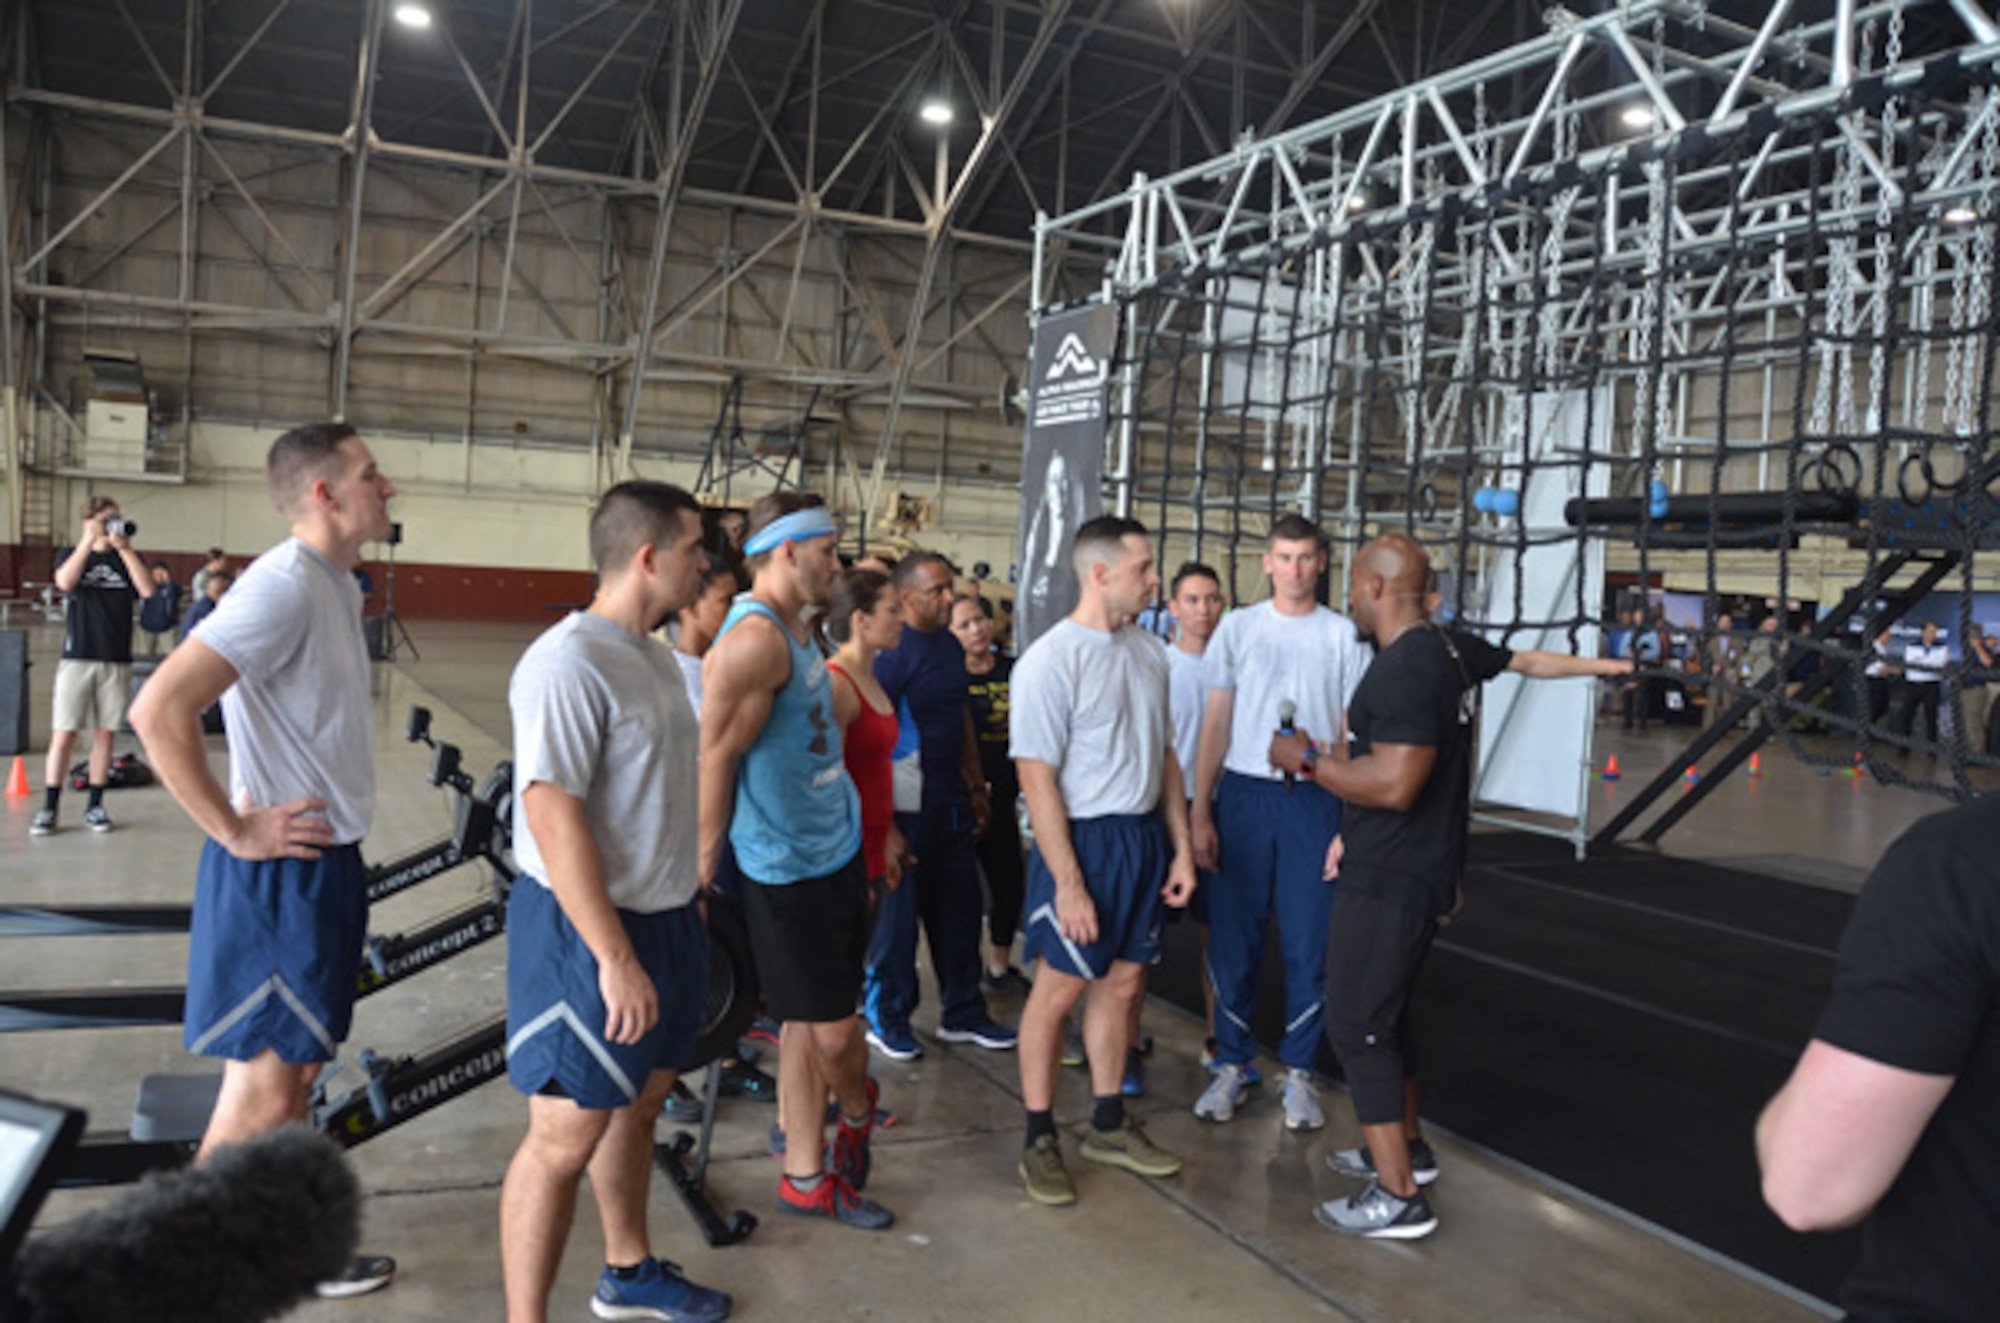 Alpha Warrior strength and conditioning coach Bennie Wylie Jr. gives instructions on how to use the Alpha Warrior Battle Rig during a presentation at Joint Base San Antonio-Lackland April 11. (U.S. Air Force photo/Steve Warns)